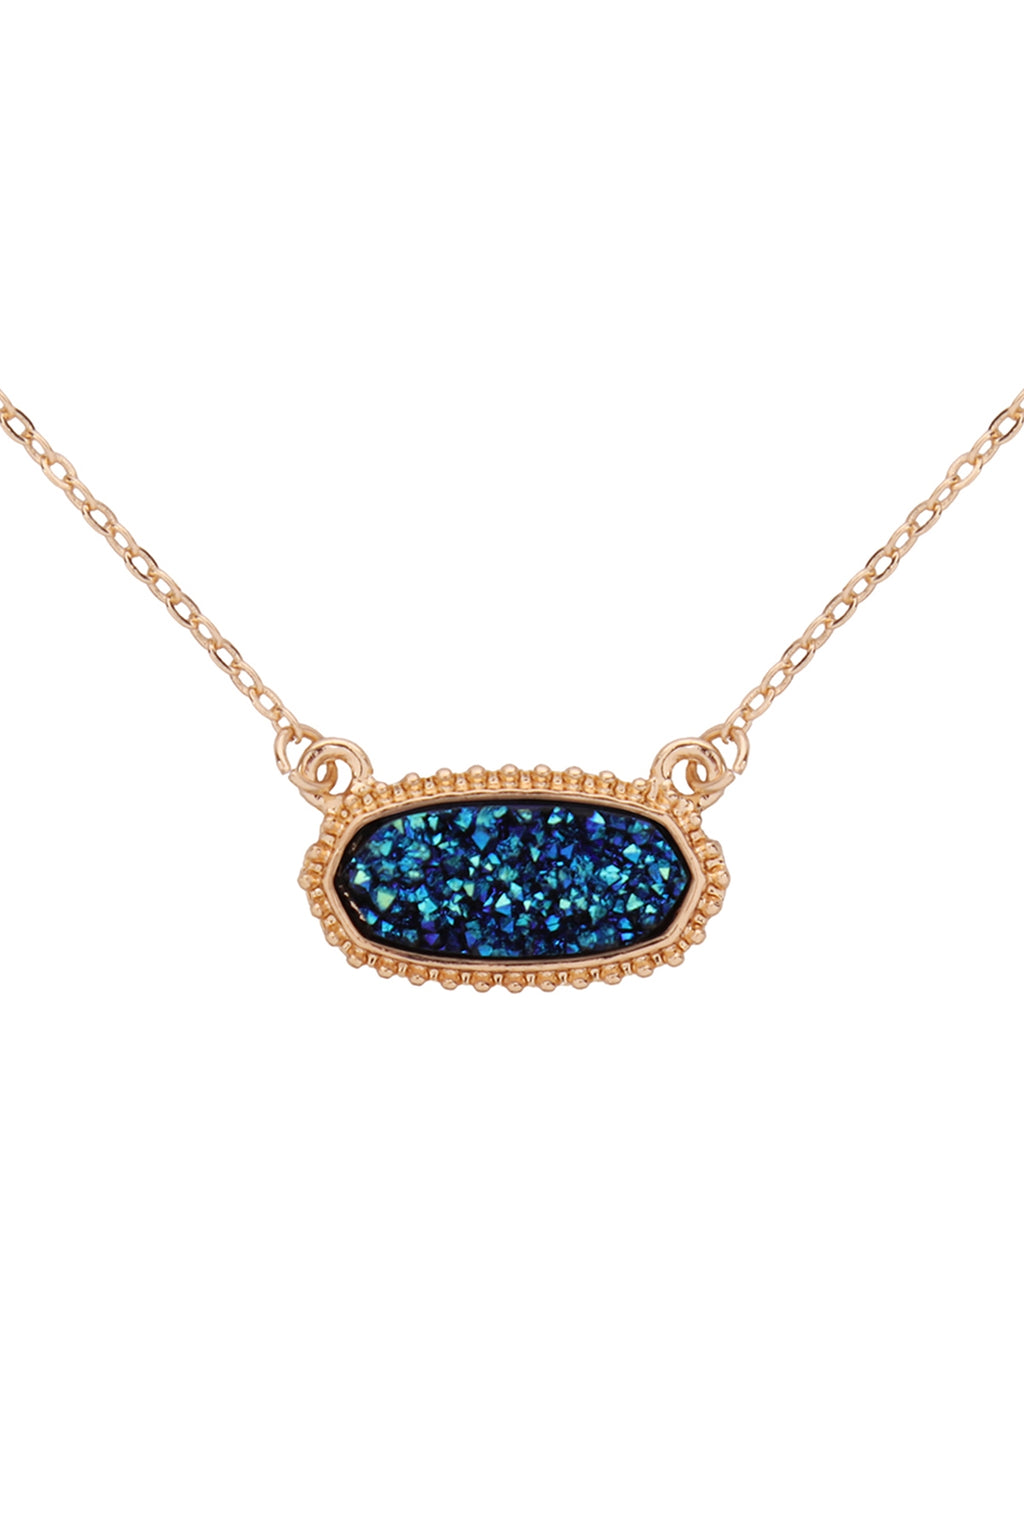 Montana Blue Druzy Oval Stone Pendant Necklace and Earring Set - Pack of 6